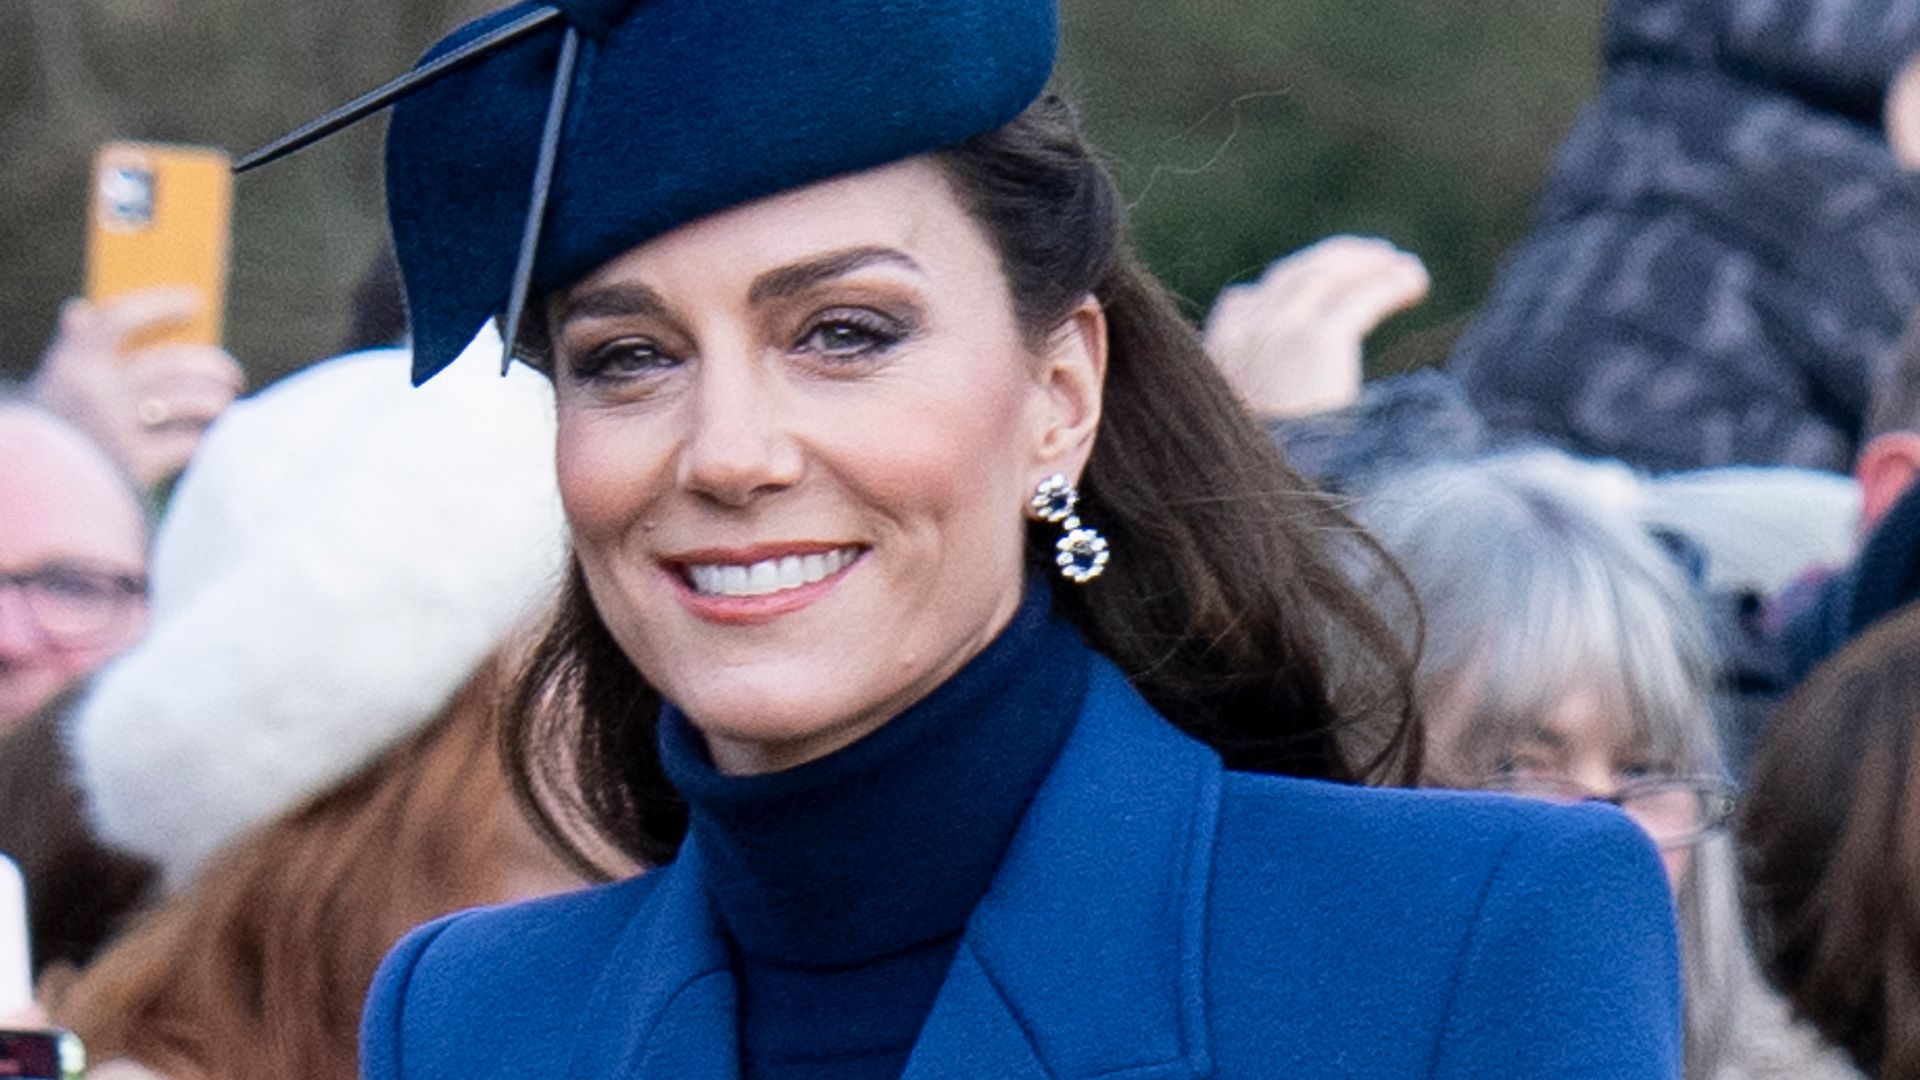 Princess Kate's earrings looked lovely